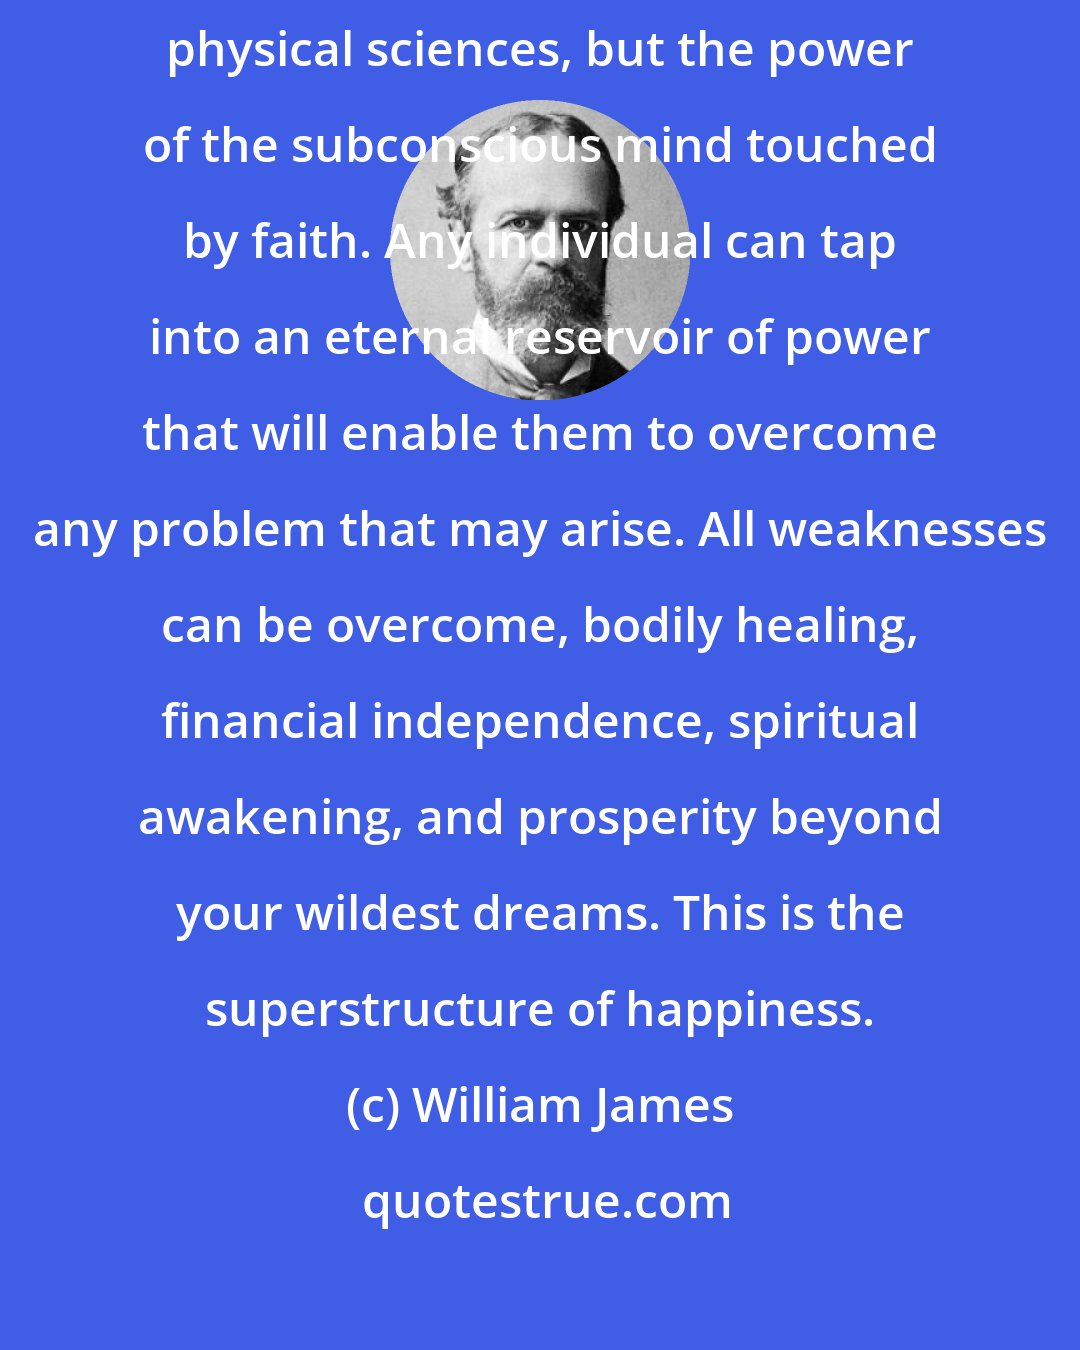 William James: The greatest discovery of the 19th century was not in the realm of the physical sciences, but the power of the subconscious mind touched by faith. Any individual can tap into an eternal reservoir of power that will enable them to overcome any problem that may arise. All weaknesses can be overcome, bodily healing, financial independence, spiritual awakening, and prosperity beyond your wildest dreams. This is the superstructure of happiness.